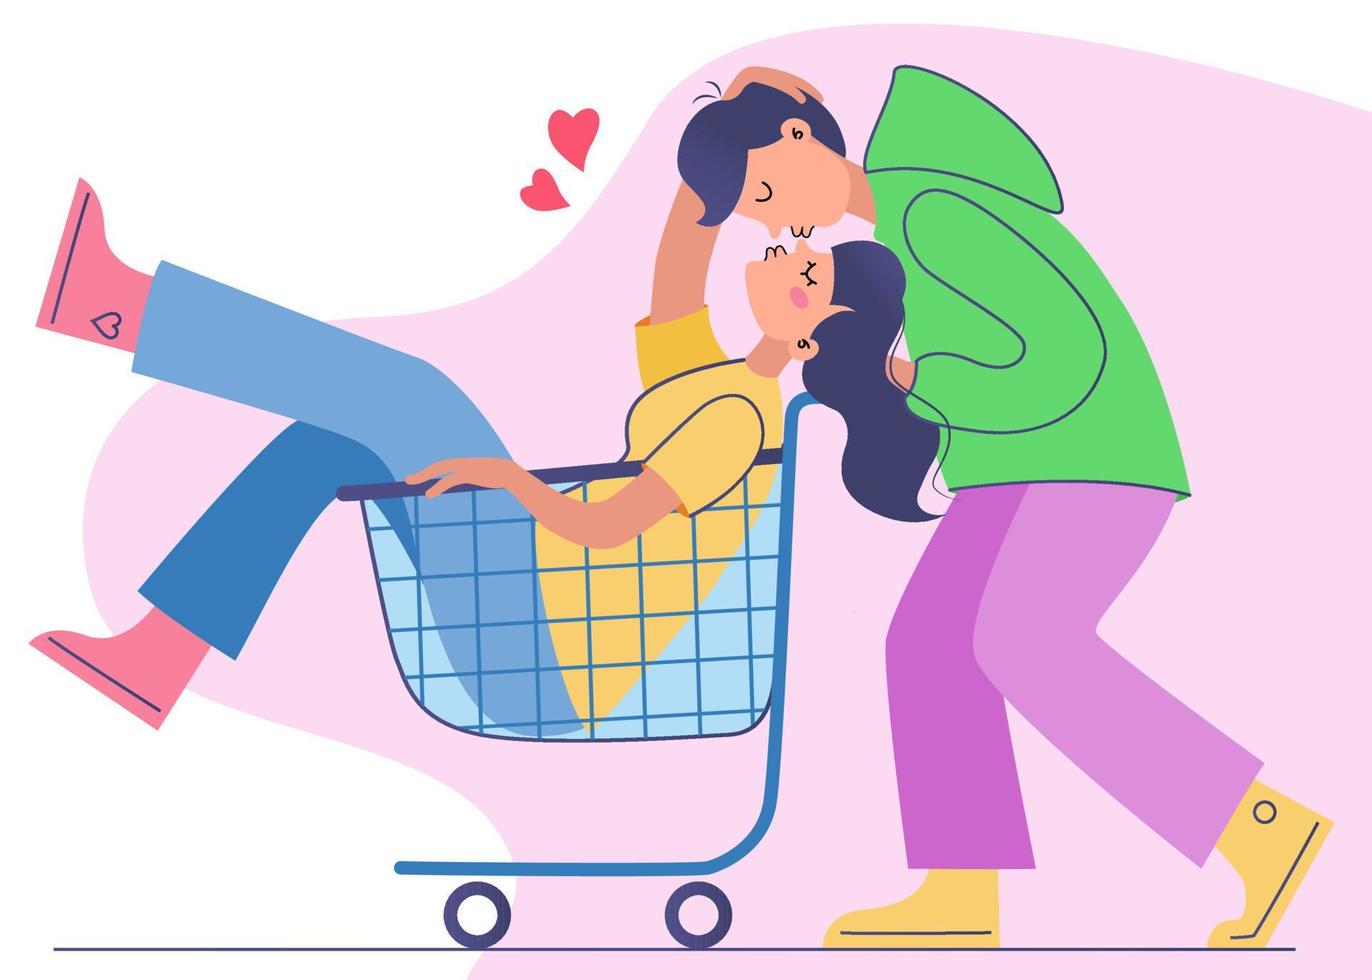 Happy man and woman having fun and riding on shopping cart in supermarket feeling playful vector illustration